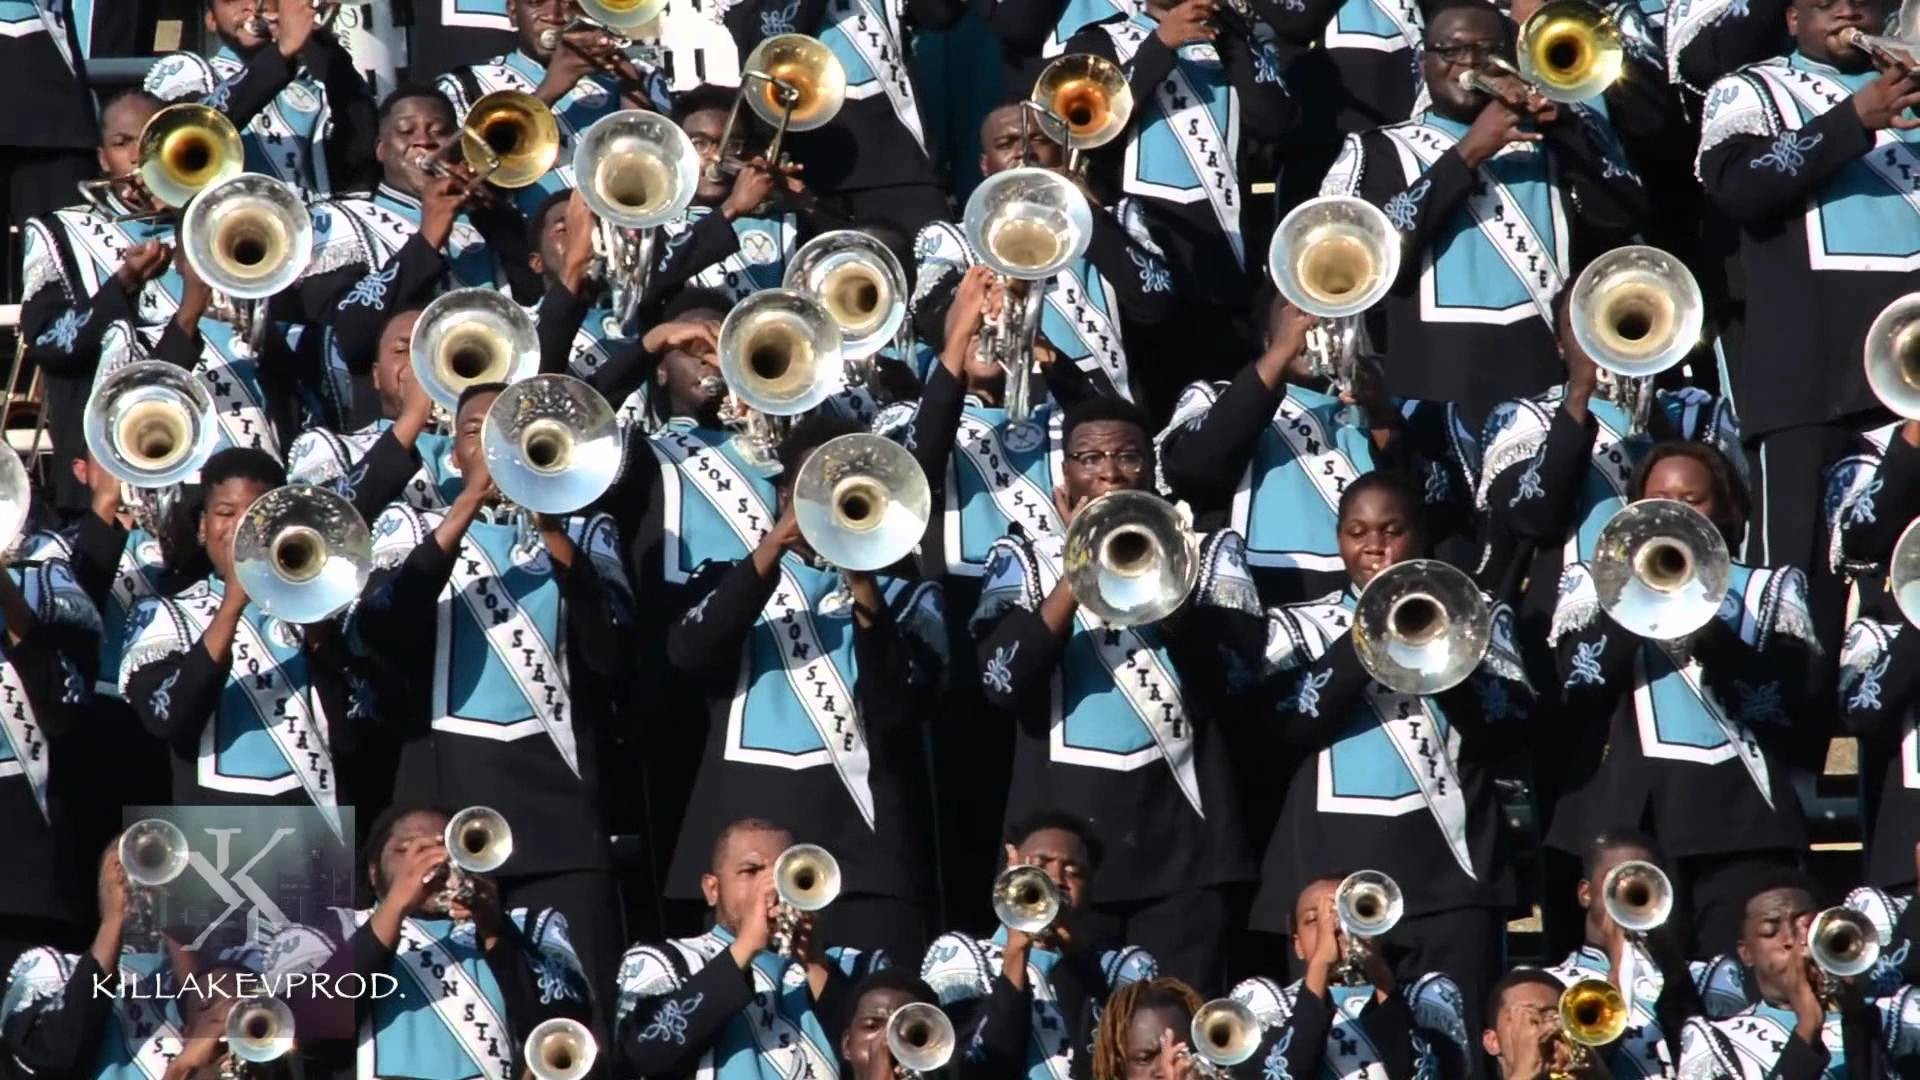 1920x1080 Jackson State University Marching Band - Party Don't Stop - 2015 - YouTube